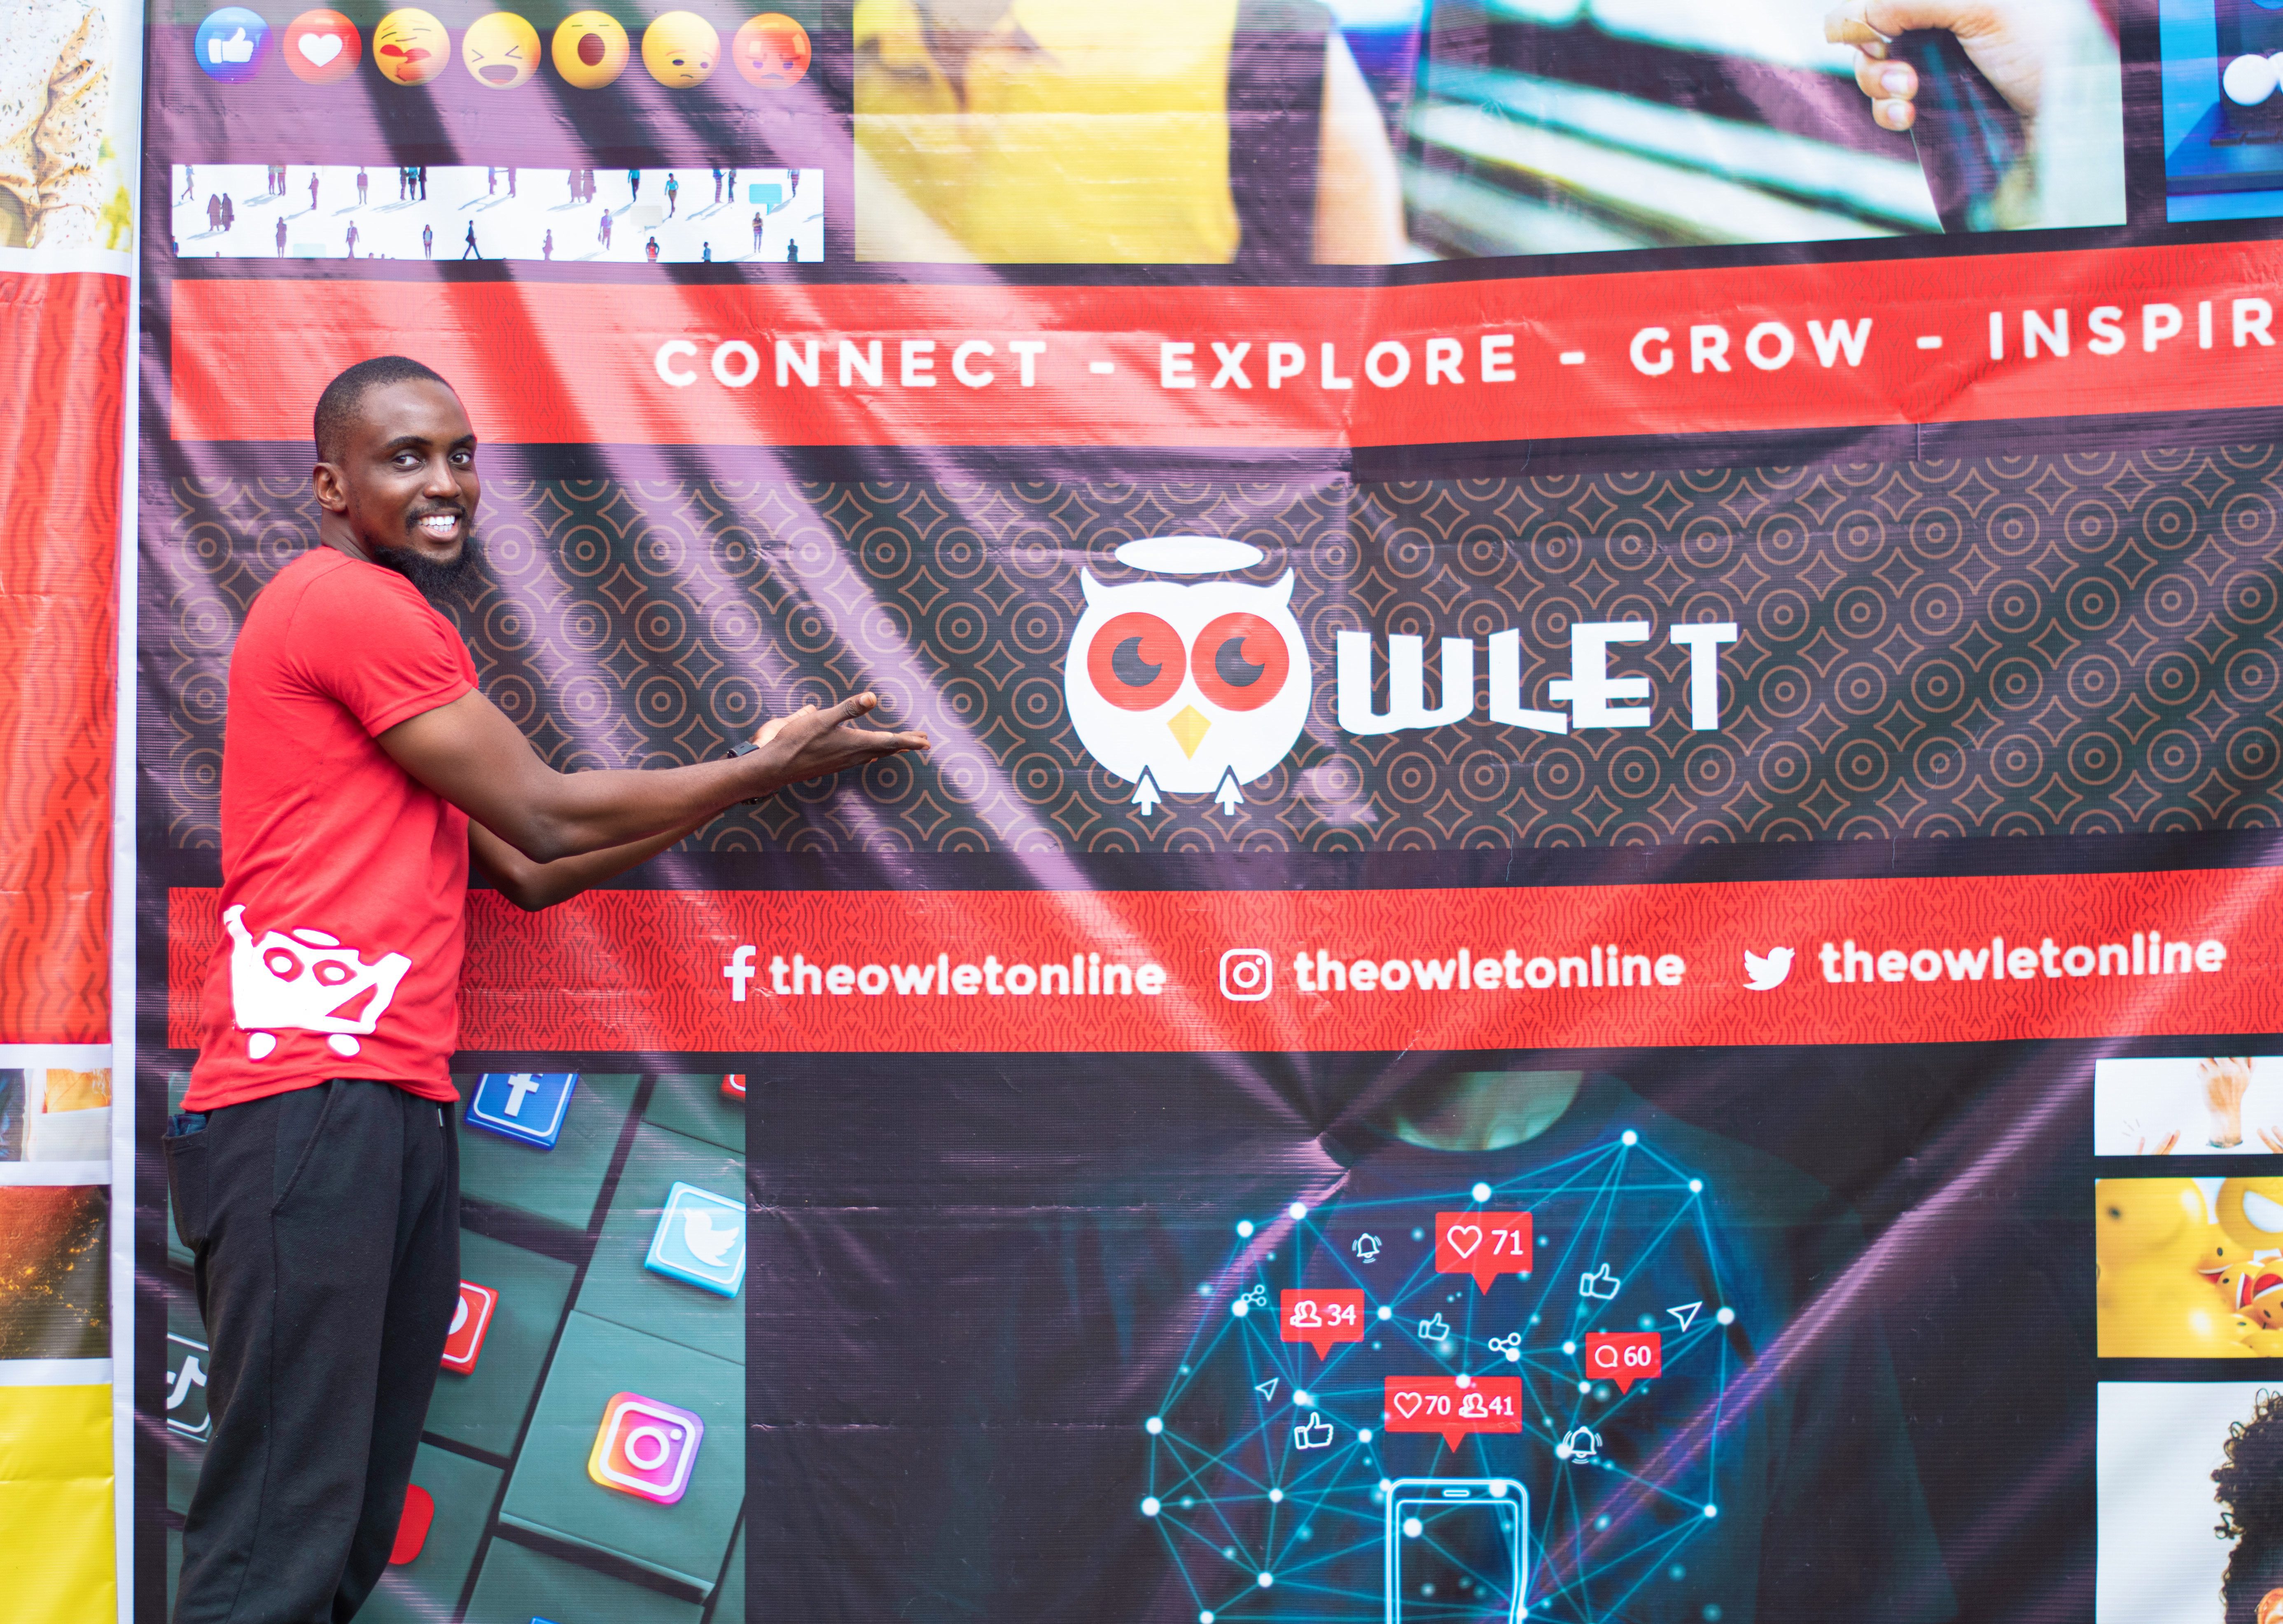 Owlet wants all petty traders to go digital